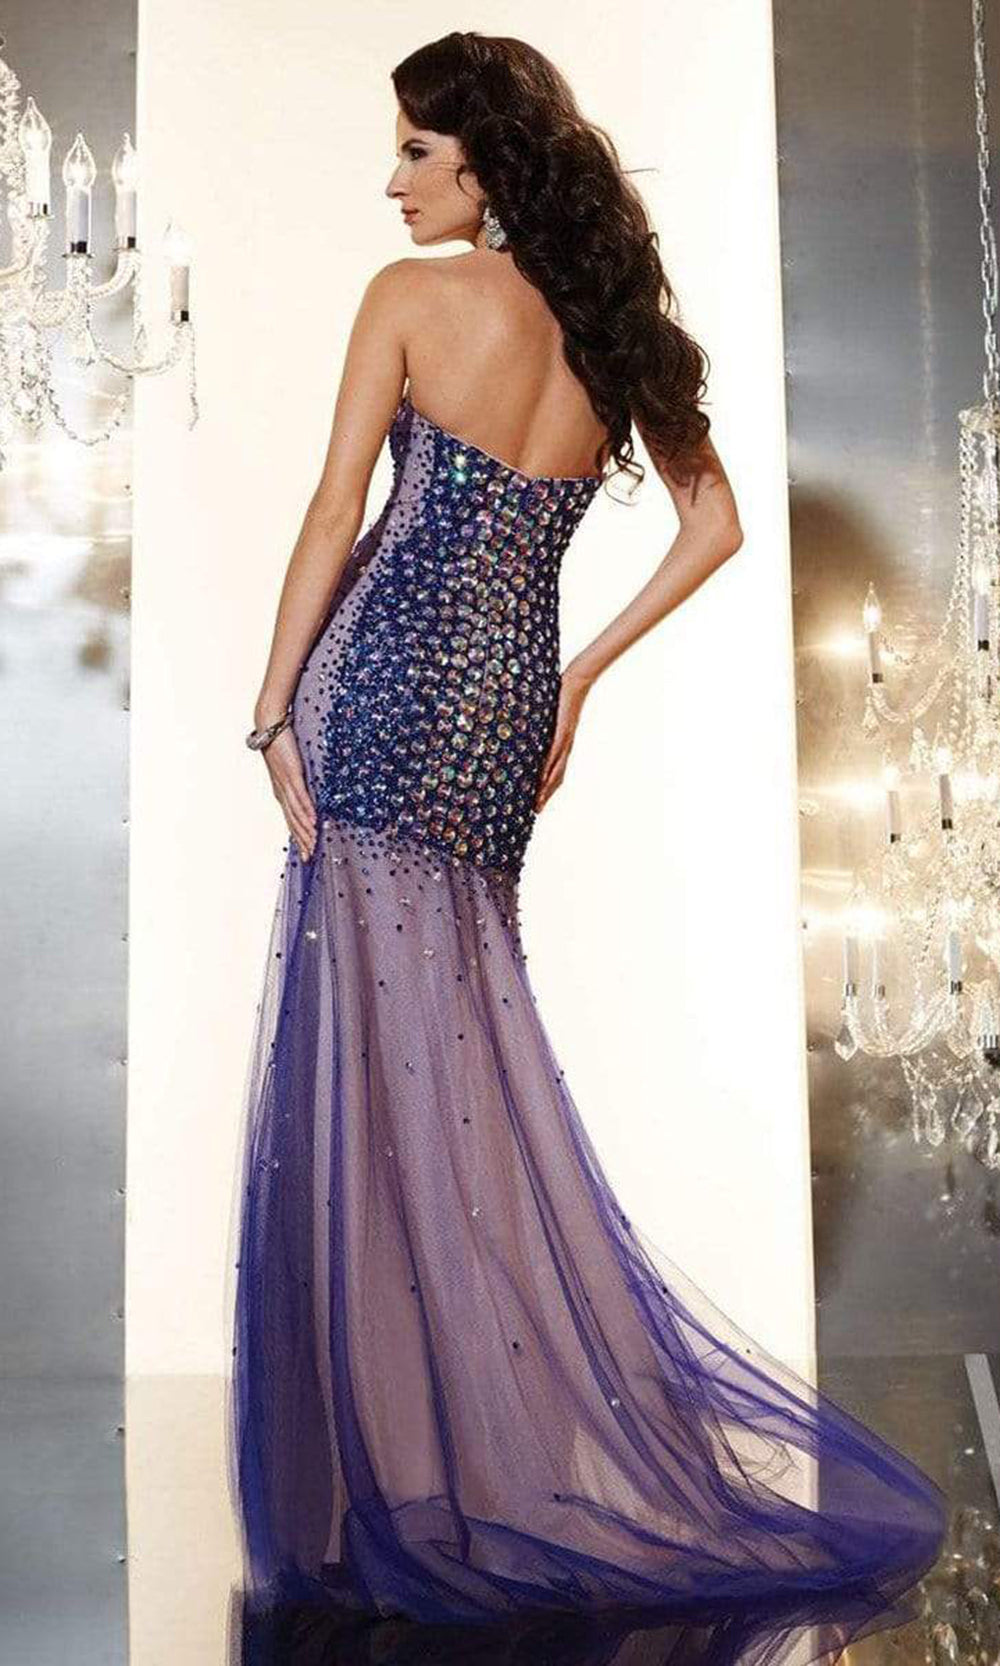 Panoply - Sweetheart Sequin Embellished Illusion Trumpet Dress 14625SC In Navy and Neutral